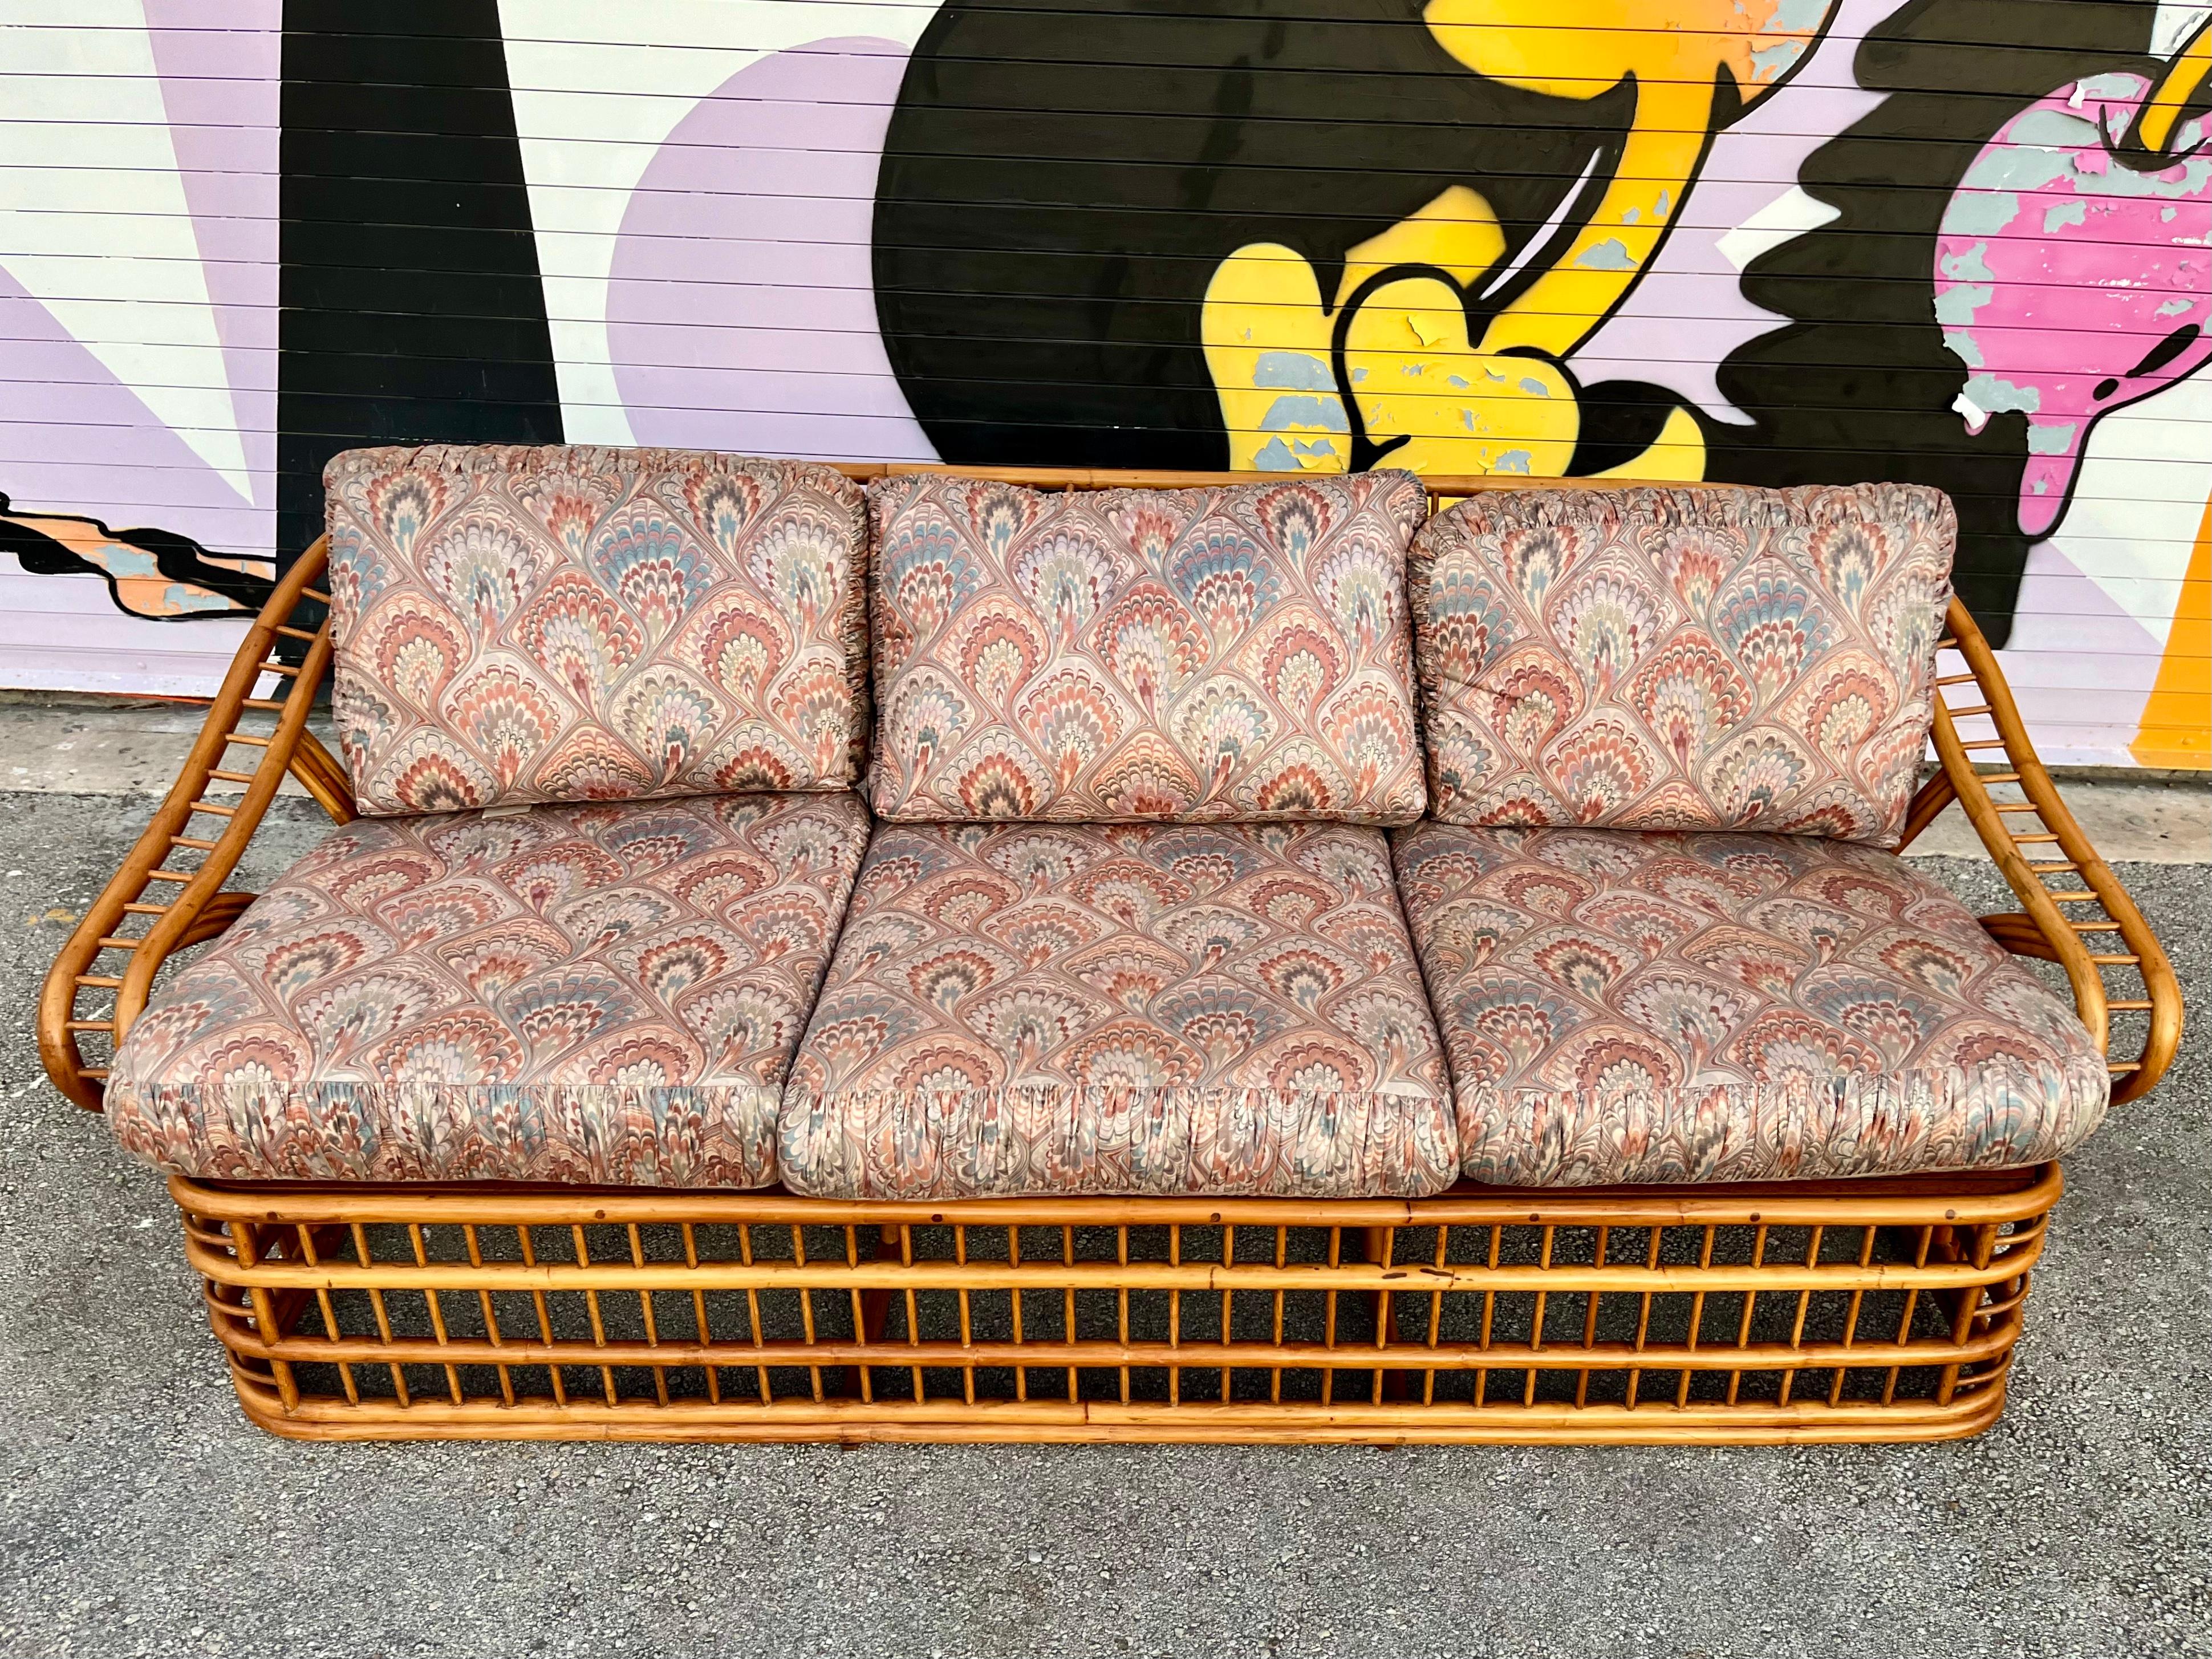 Vintage Coastal Style Rattan Three Seats Sofa by Whitecraft Rattan Inc, Miami FL. Circa 1970s
Features a bent rattan frame with an intricate and dynamic fluid design at the back and armrests. 
In excellent original condition with very minor sings of